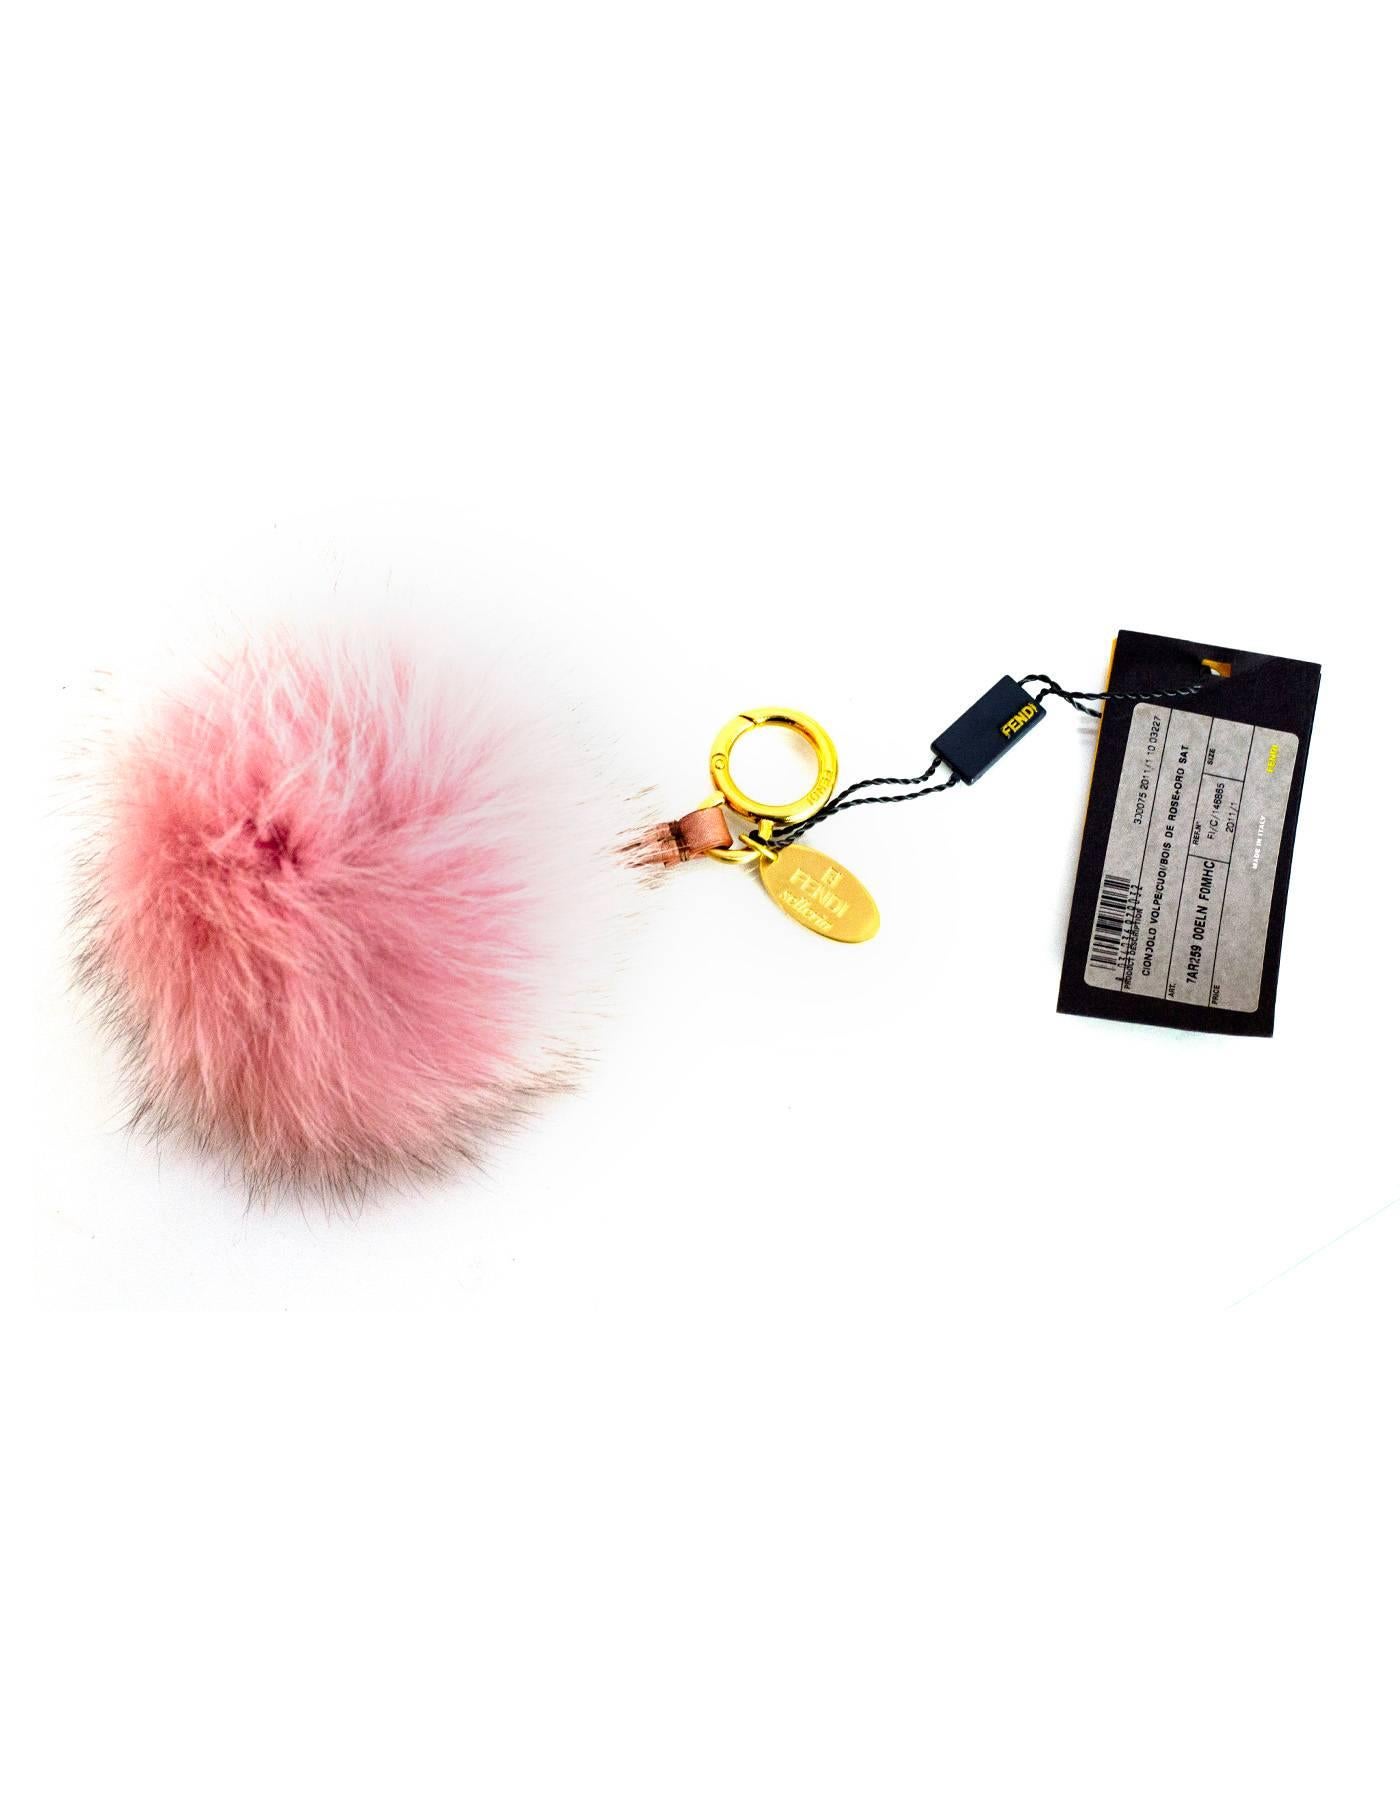 Fendi NEW Fox Fur Selleria Pom Pom Bag Charm 
Features metallic mauve leather strap

Color: Mauve/pink
Hardware: Goldtone
Materials: Fox fur, leather and metal
Closure/Opening: Jump ring push lever
Overall Condition: Excellent- NEW
Includes: Fendi